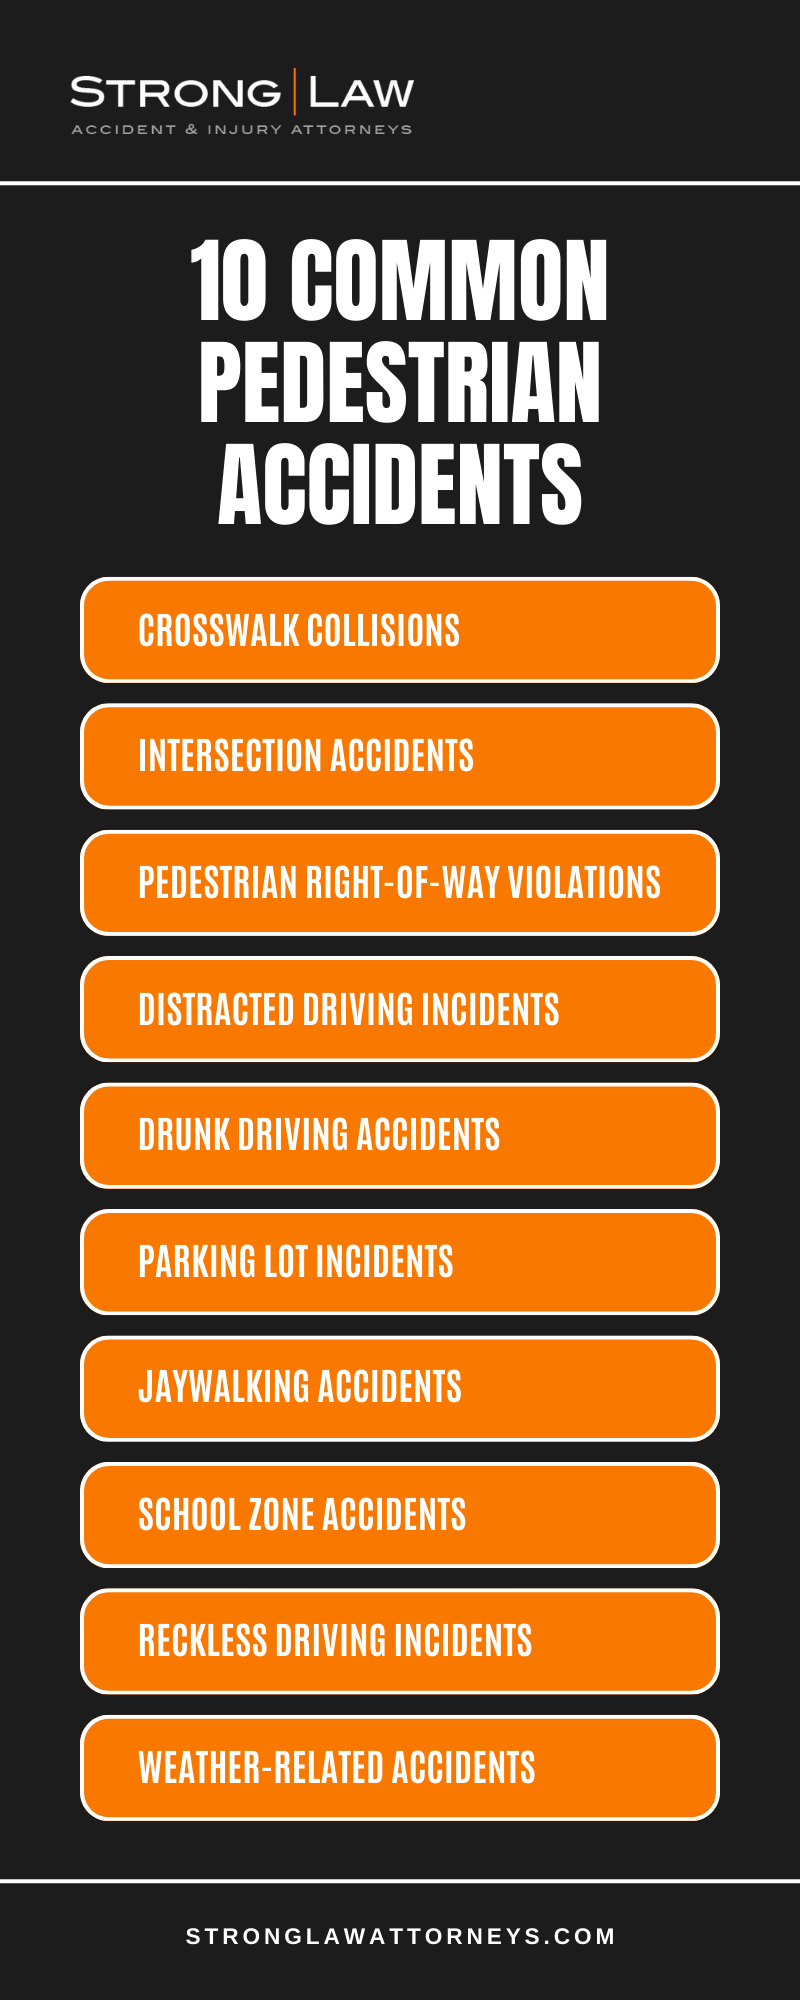 10 Common Pedestrian Accidents Infographic